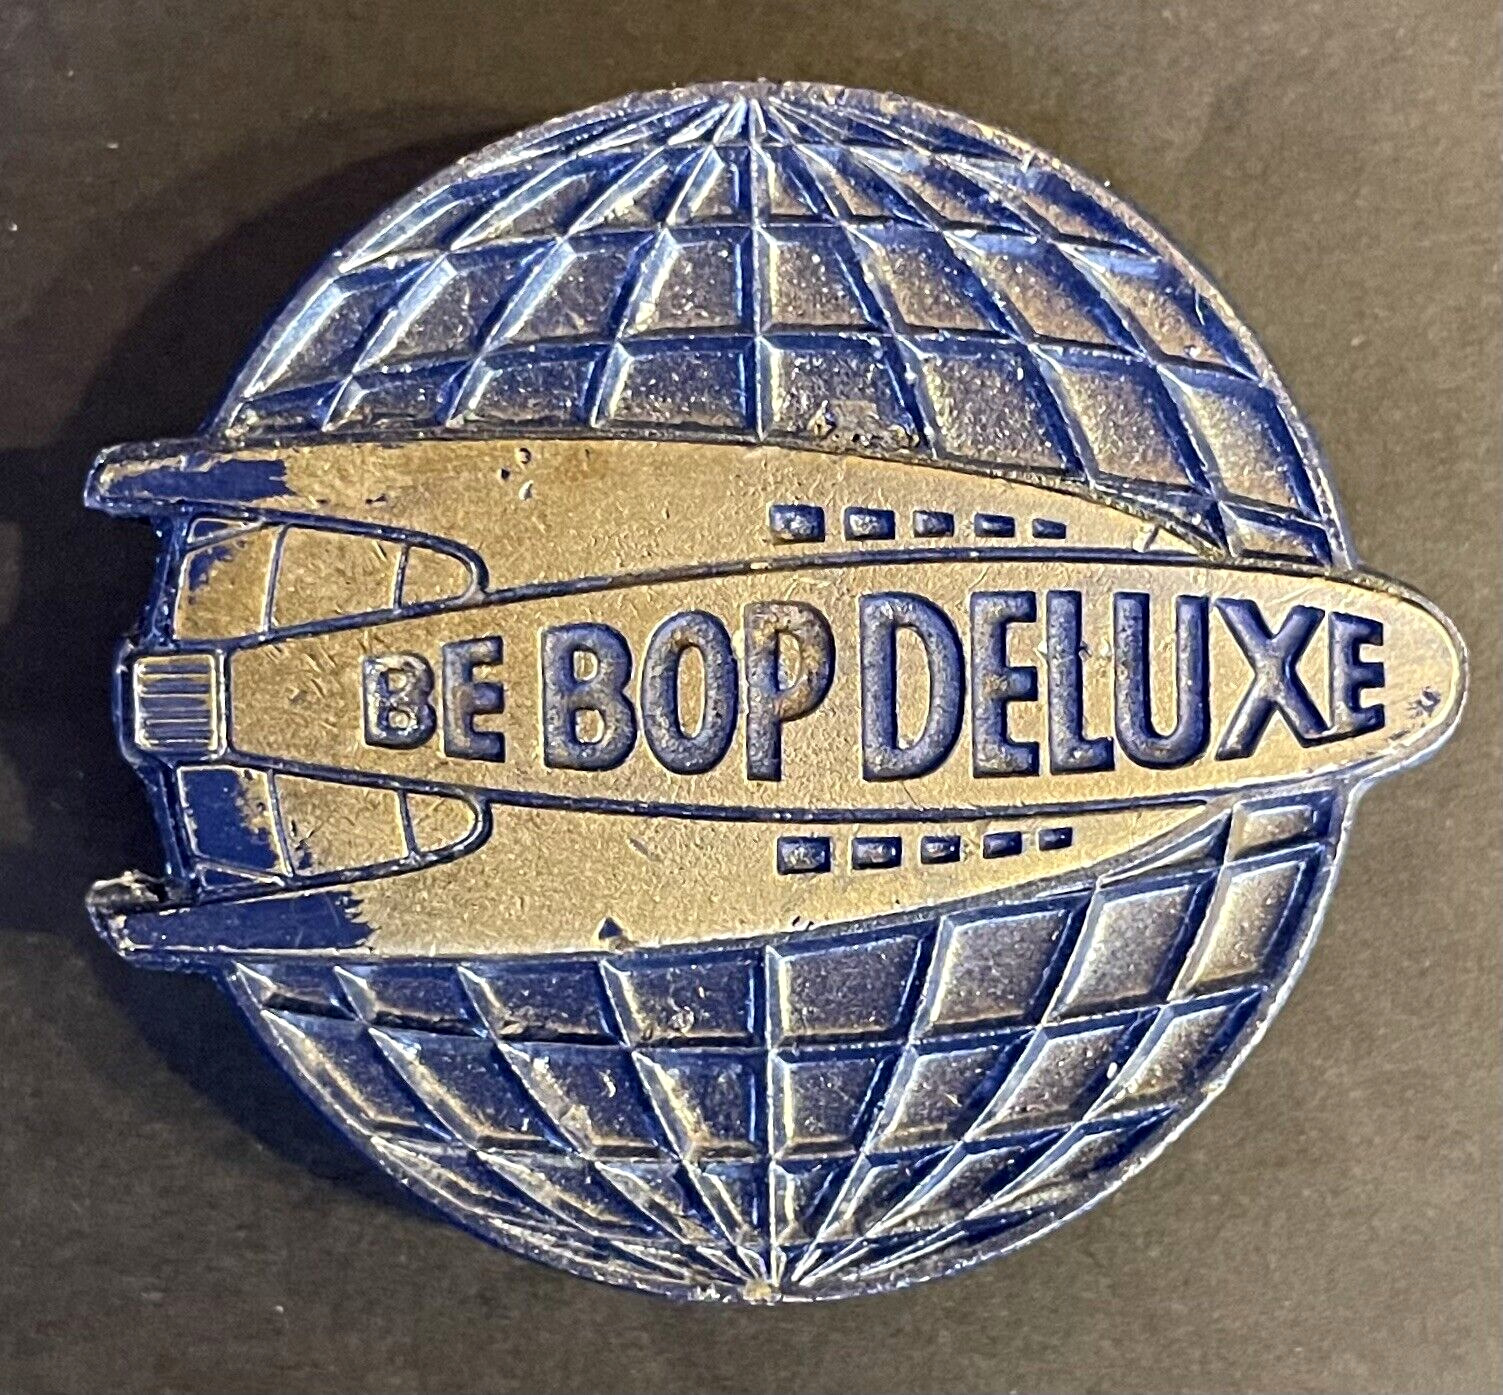 BE BOP DELUXE Vintage 1970s Capitol Promo BELT BUCKLE Pewter RARE Bill Nelson